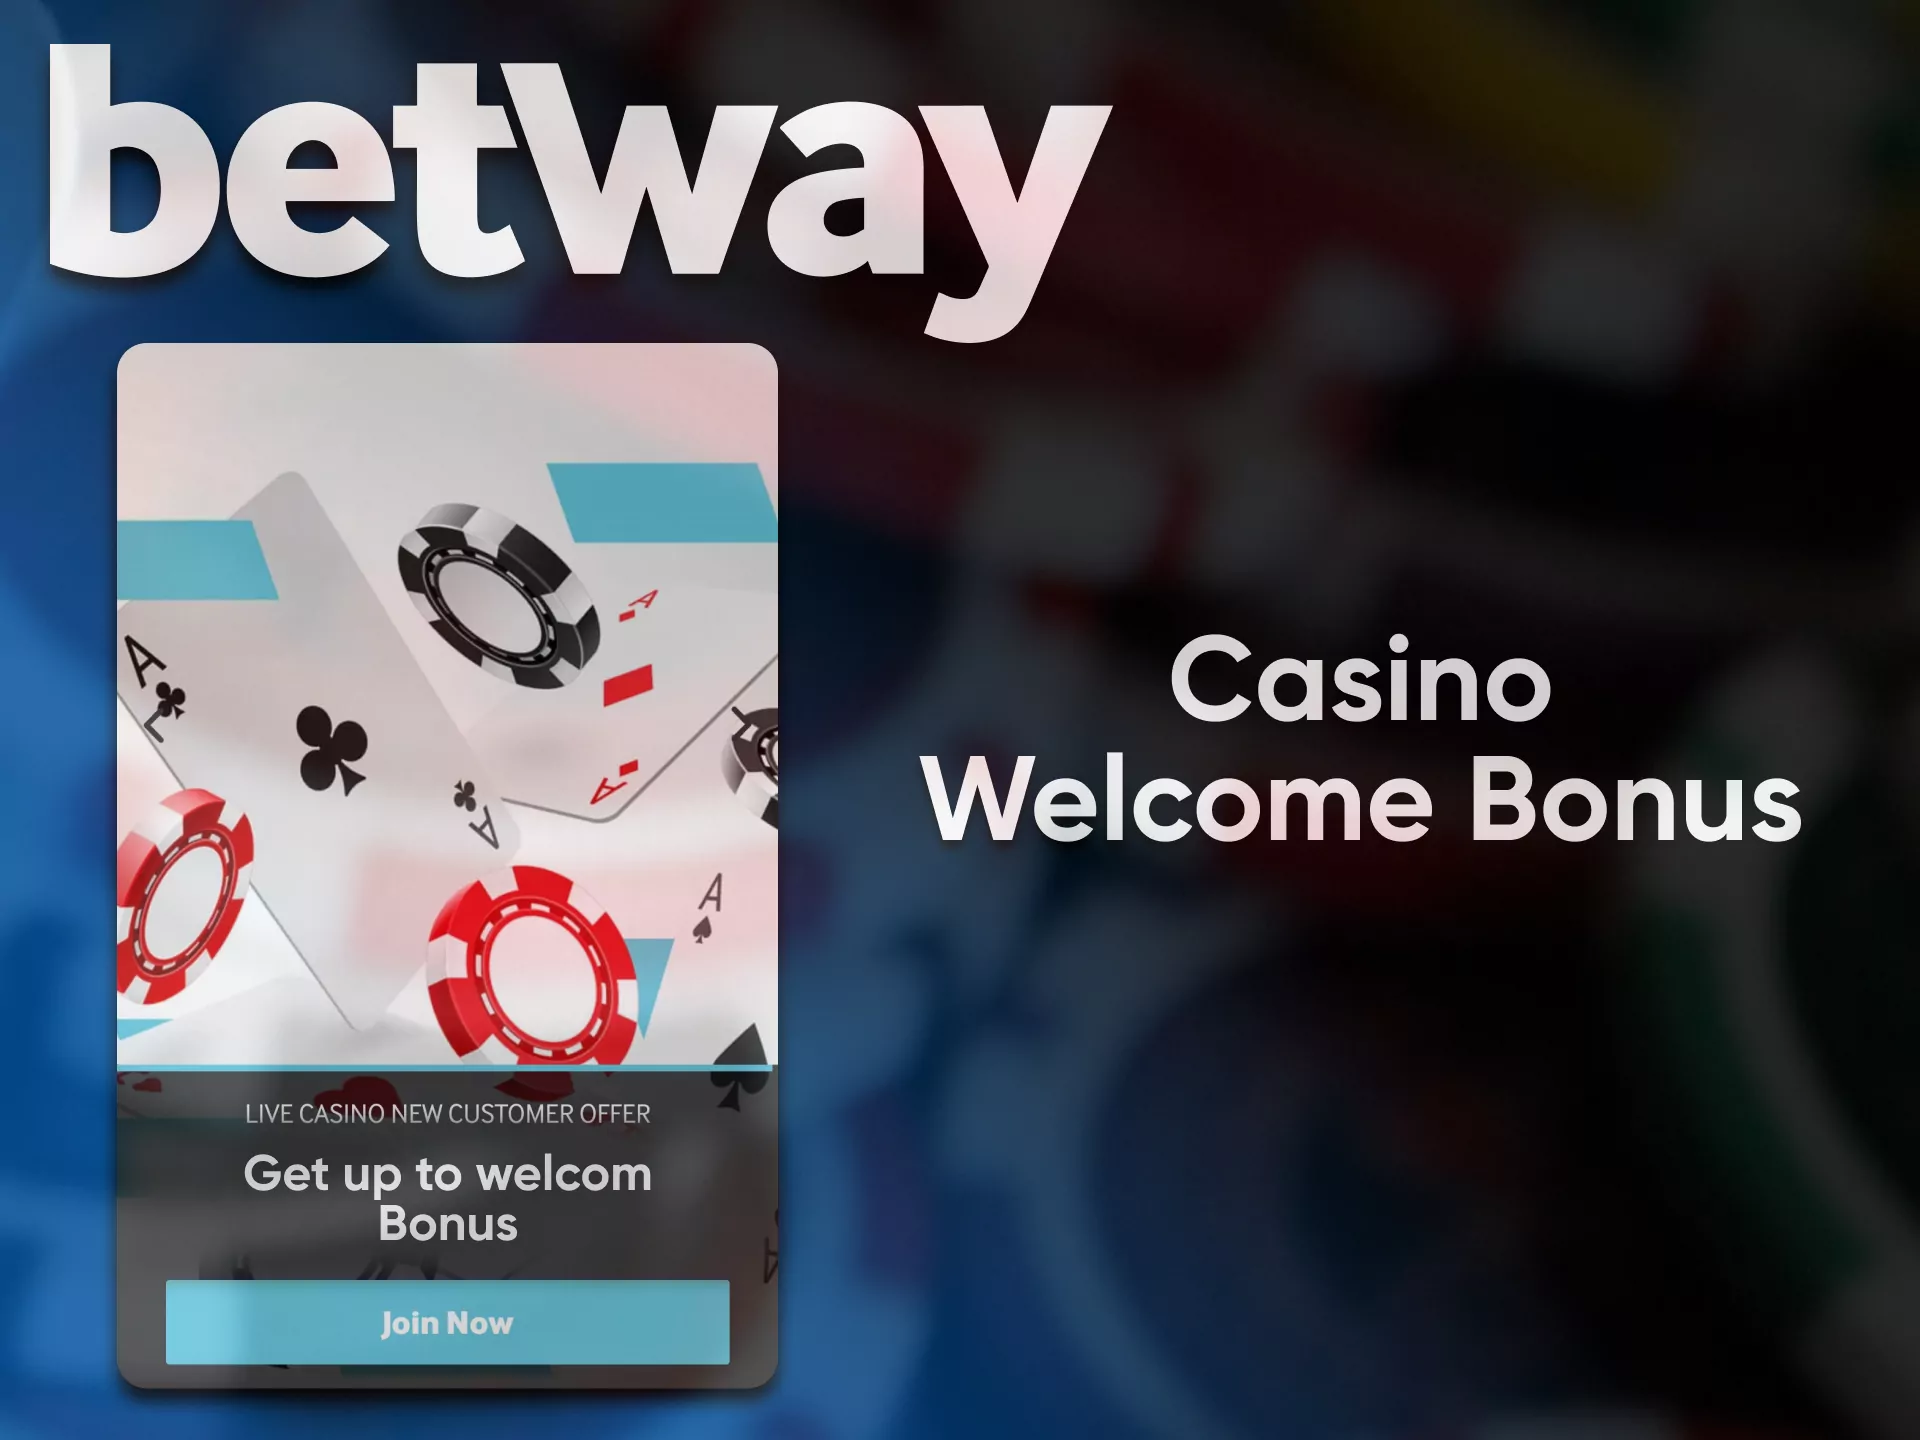 Play the Betway casino and get a bonus.